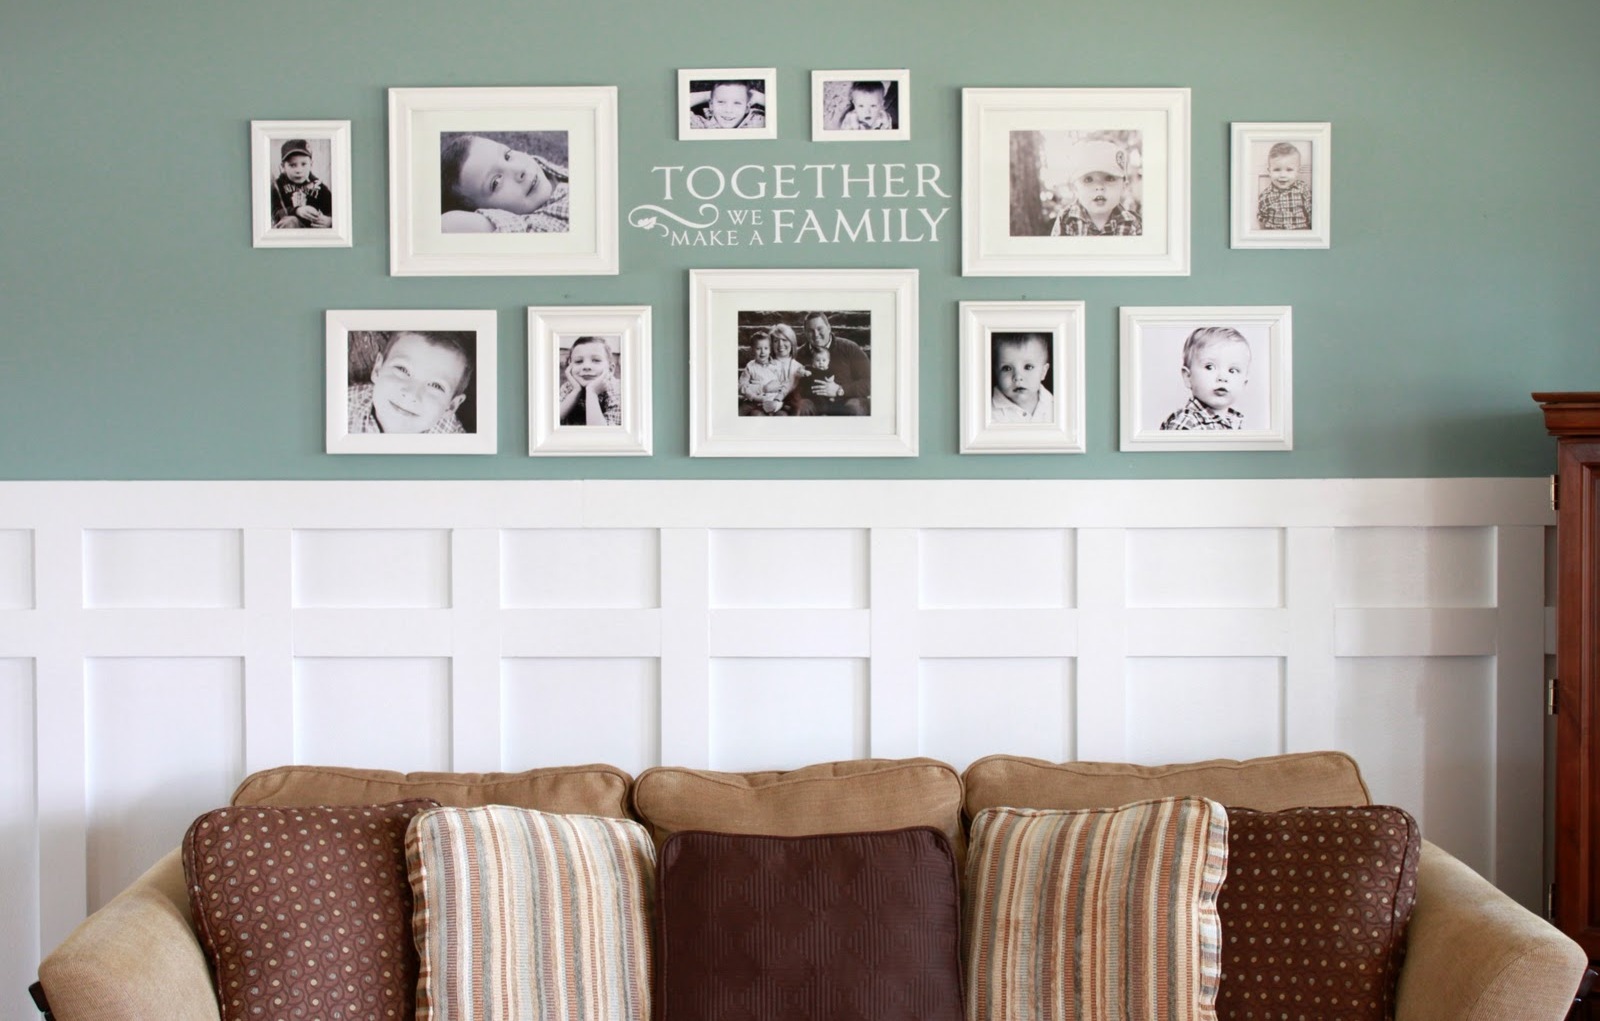 Photo Wall Mixed Framed Photo Wall Decorating Ideas Mixed With Letter Pattern Over Marshmallow Molding Wainscoting Decoration Lovely And Inspiring Wall Decorating Ideas For Your Room